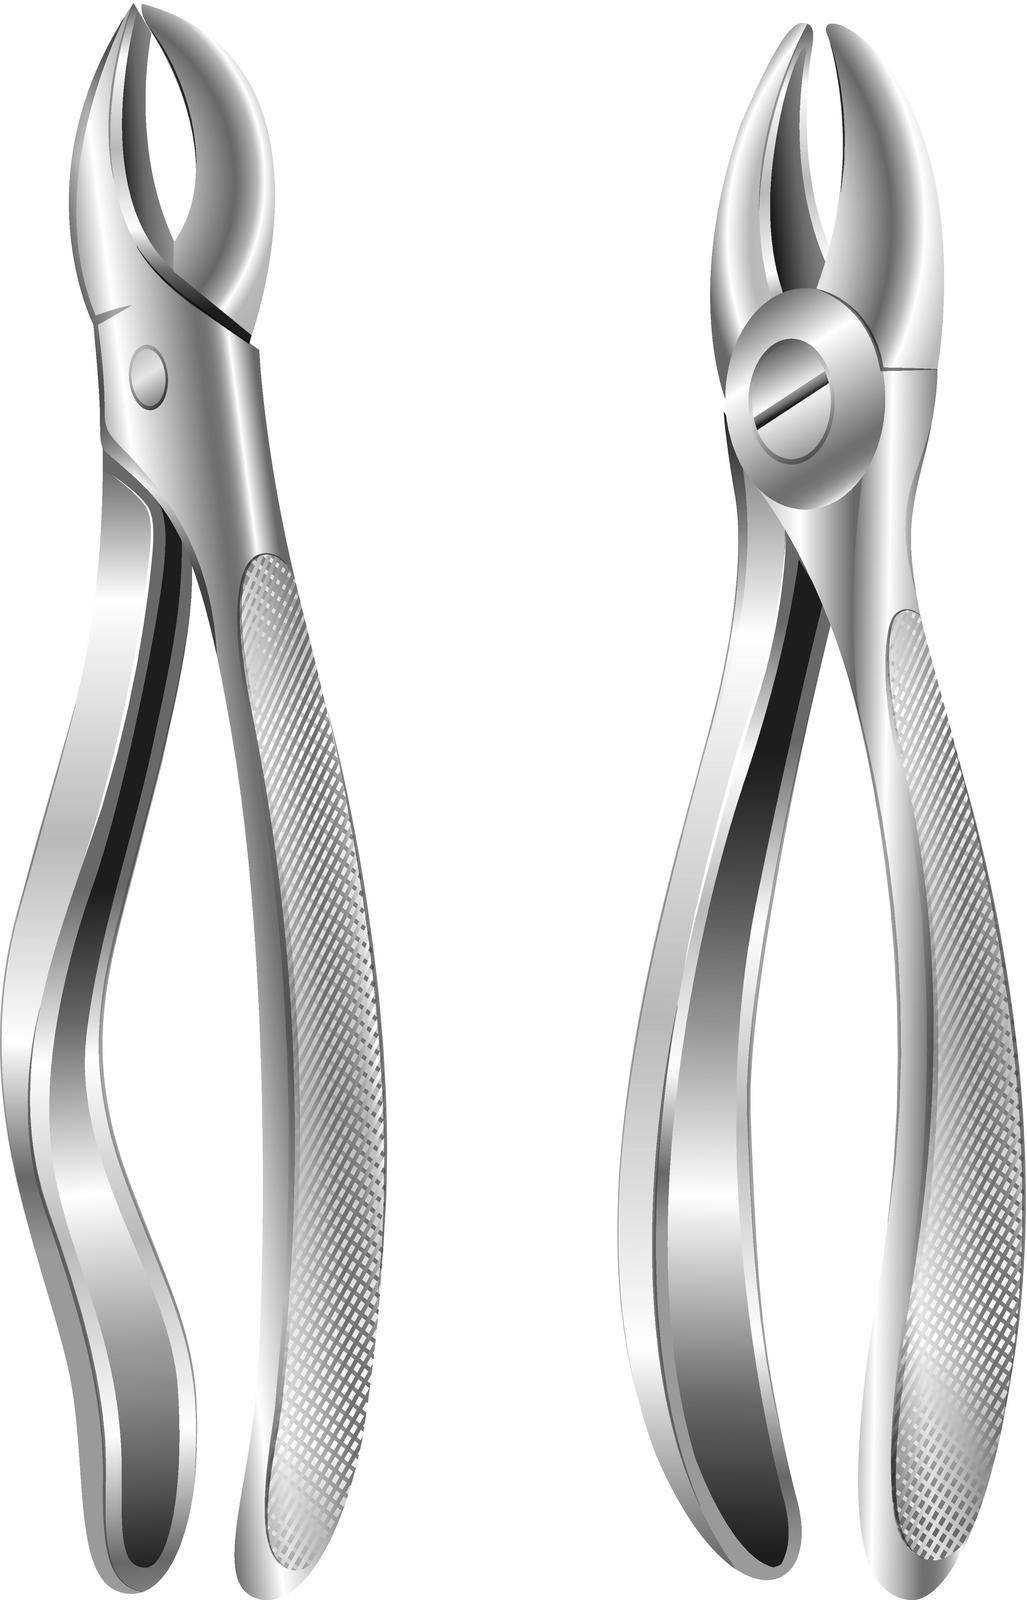 Illustration of the stainless dental pliers on a white background